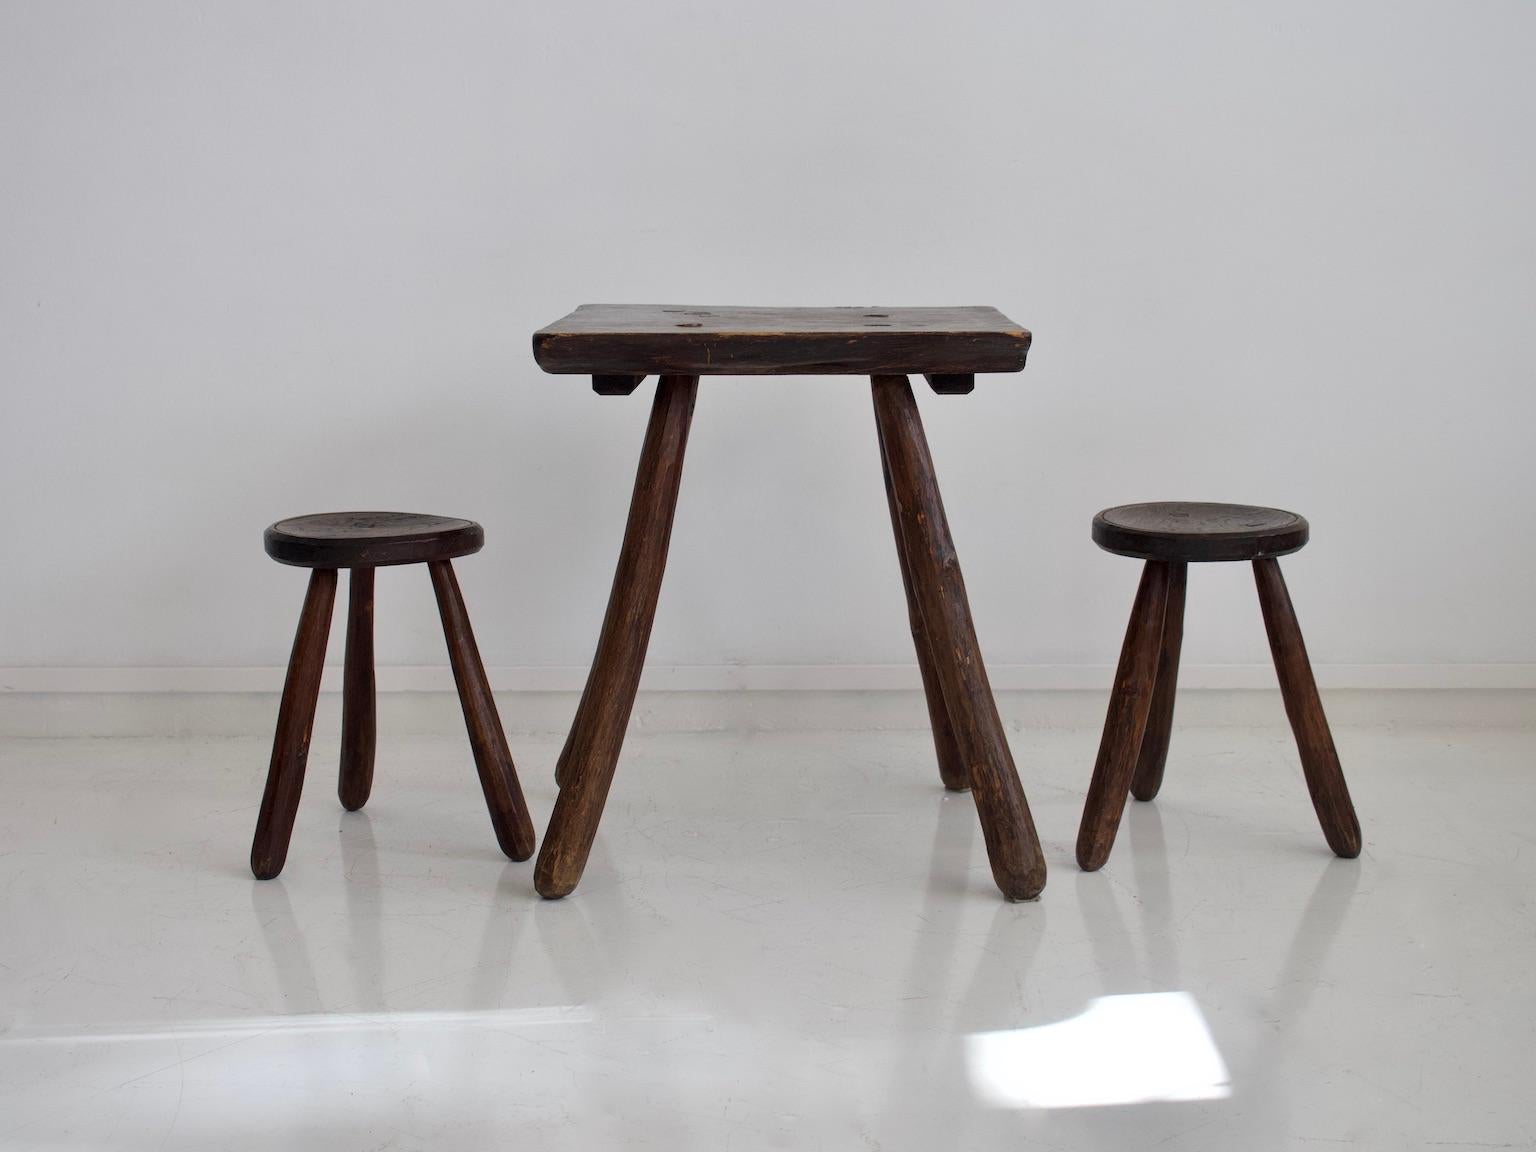 Set of a rustic table and two tripod stools in profiled wood log carved with gouge. Made in France in circa 1950.
Measures: Table H 71 x W 60 x D 60 cm.
Stools height 44 cm, diameter 29 cm.